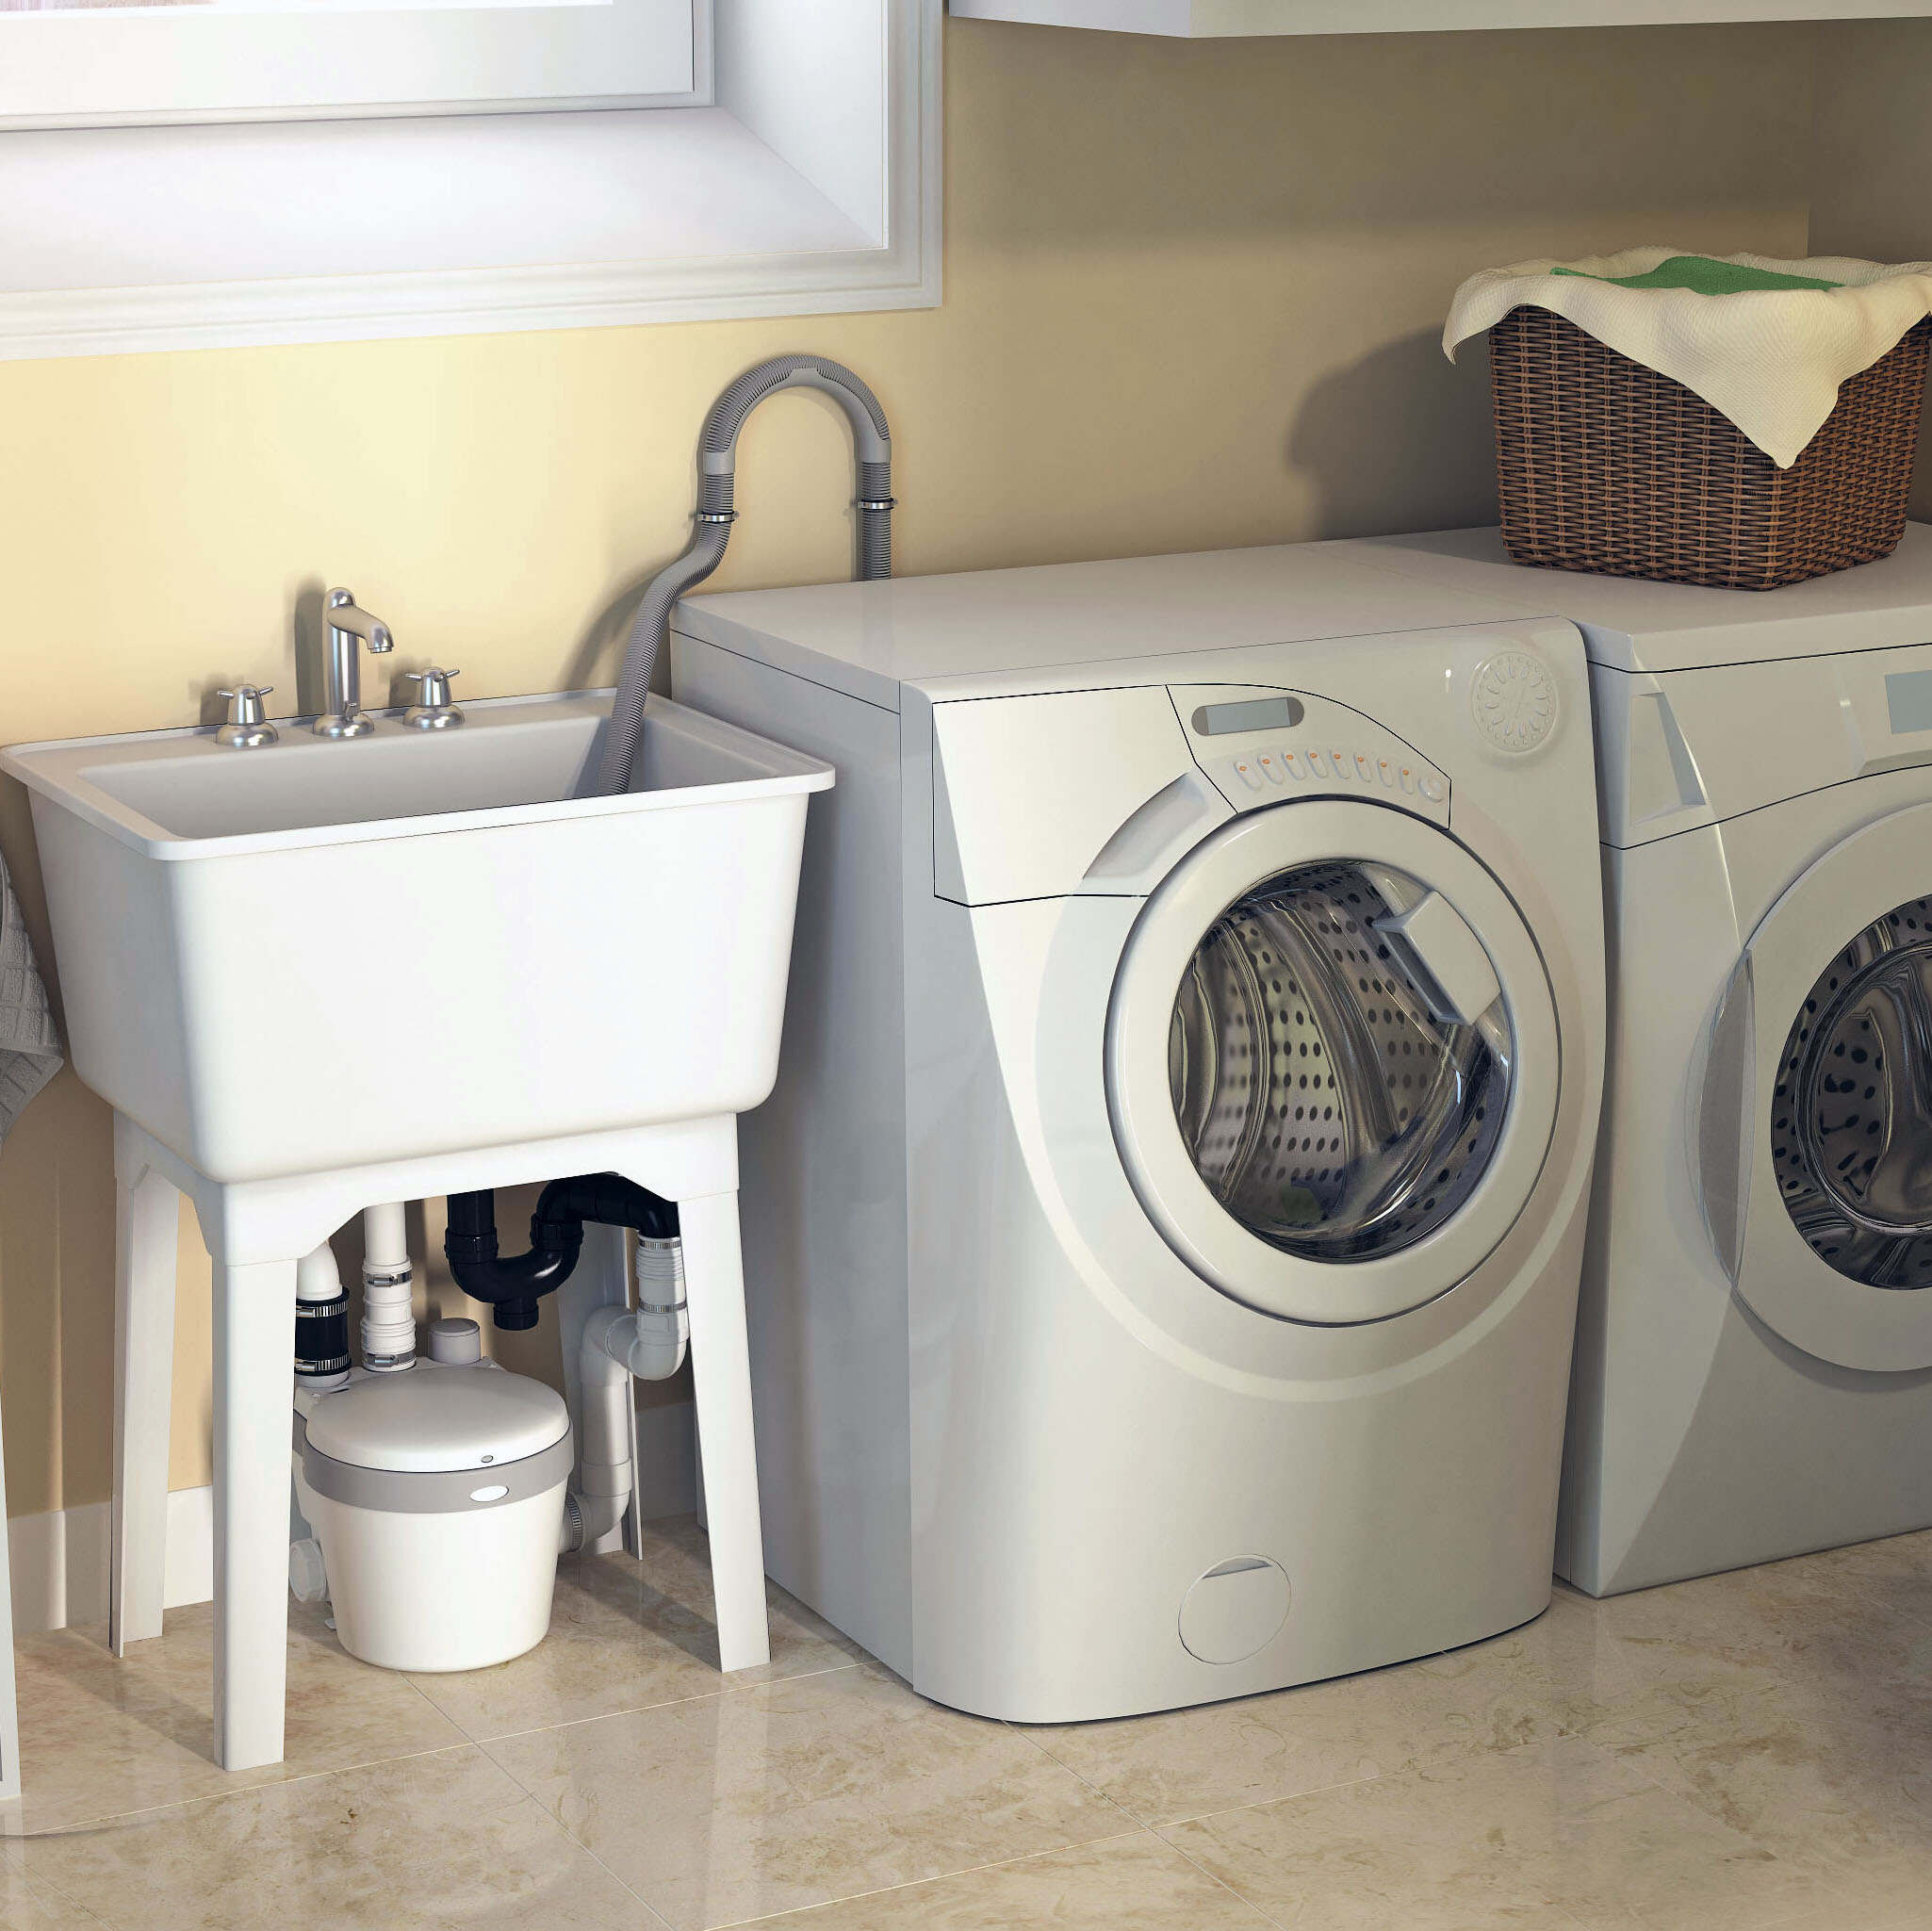 How To Install Sink In Laundry Room | Storables